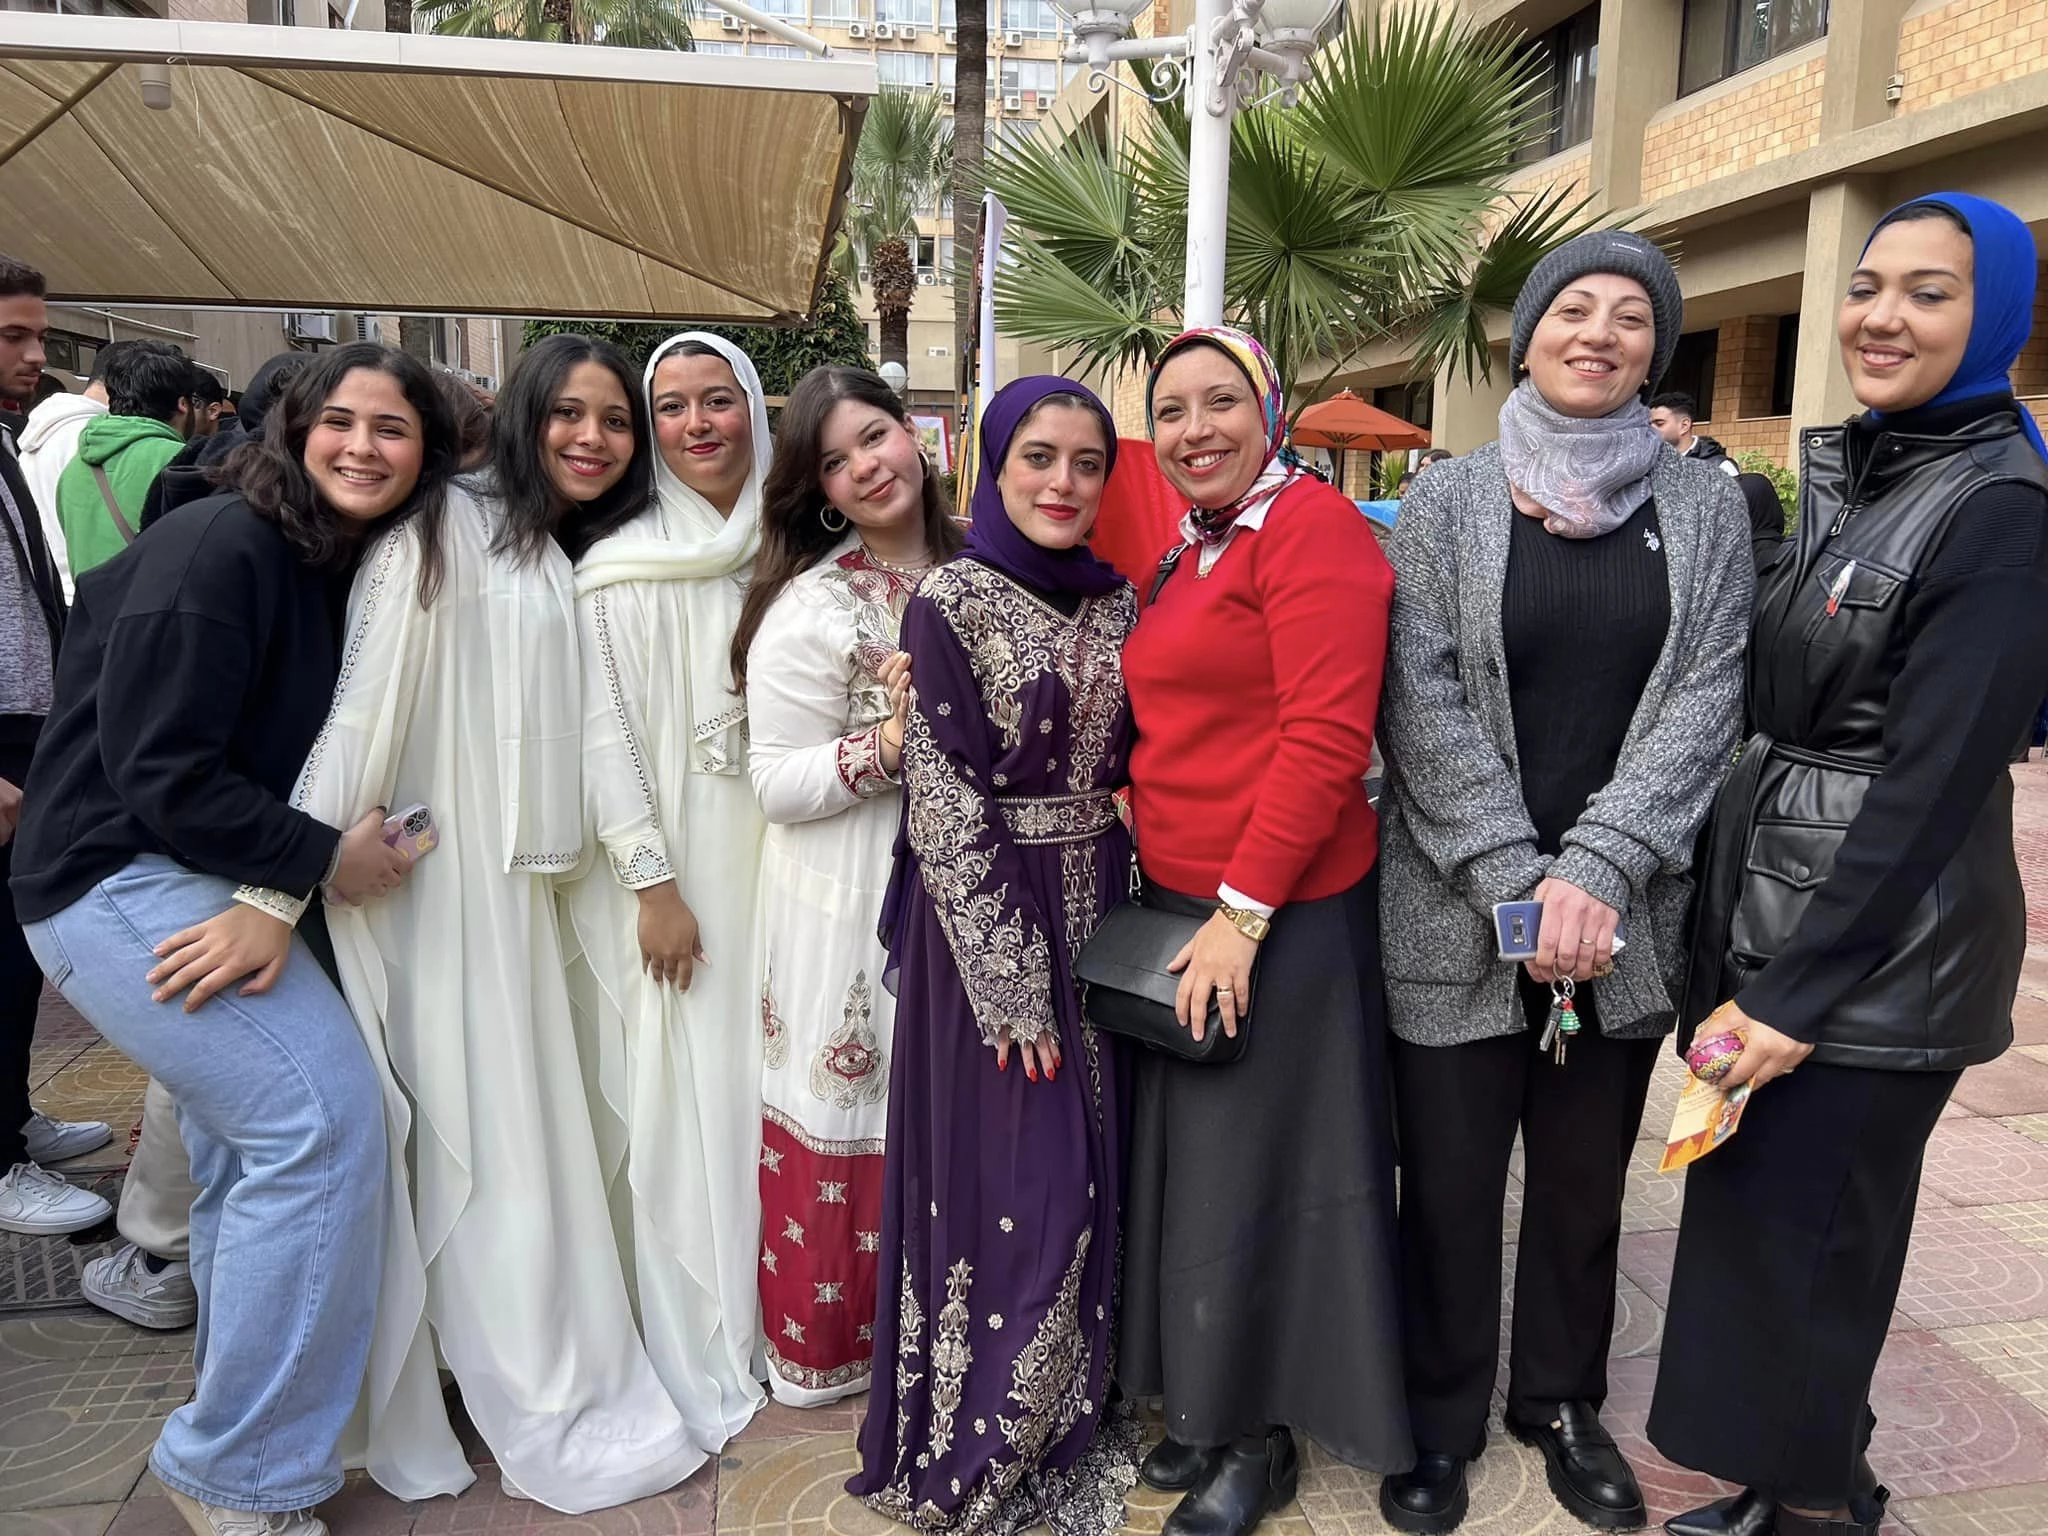 The Department of Cultural and Social Activities in Babi Qir organized an Intercultural Day for students of the College of Language and Media, including performances from various countries about the years of struggle of those peoples on: 12/25/20236